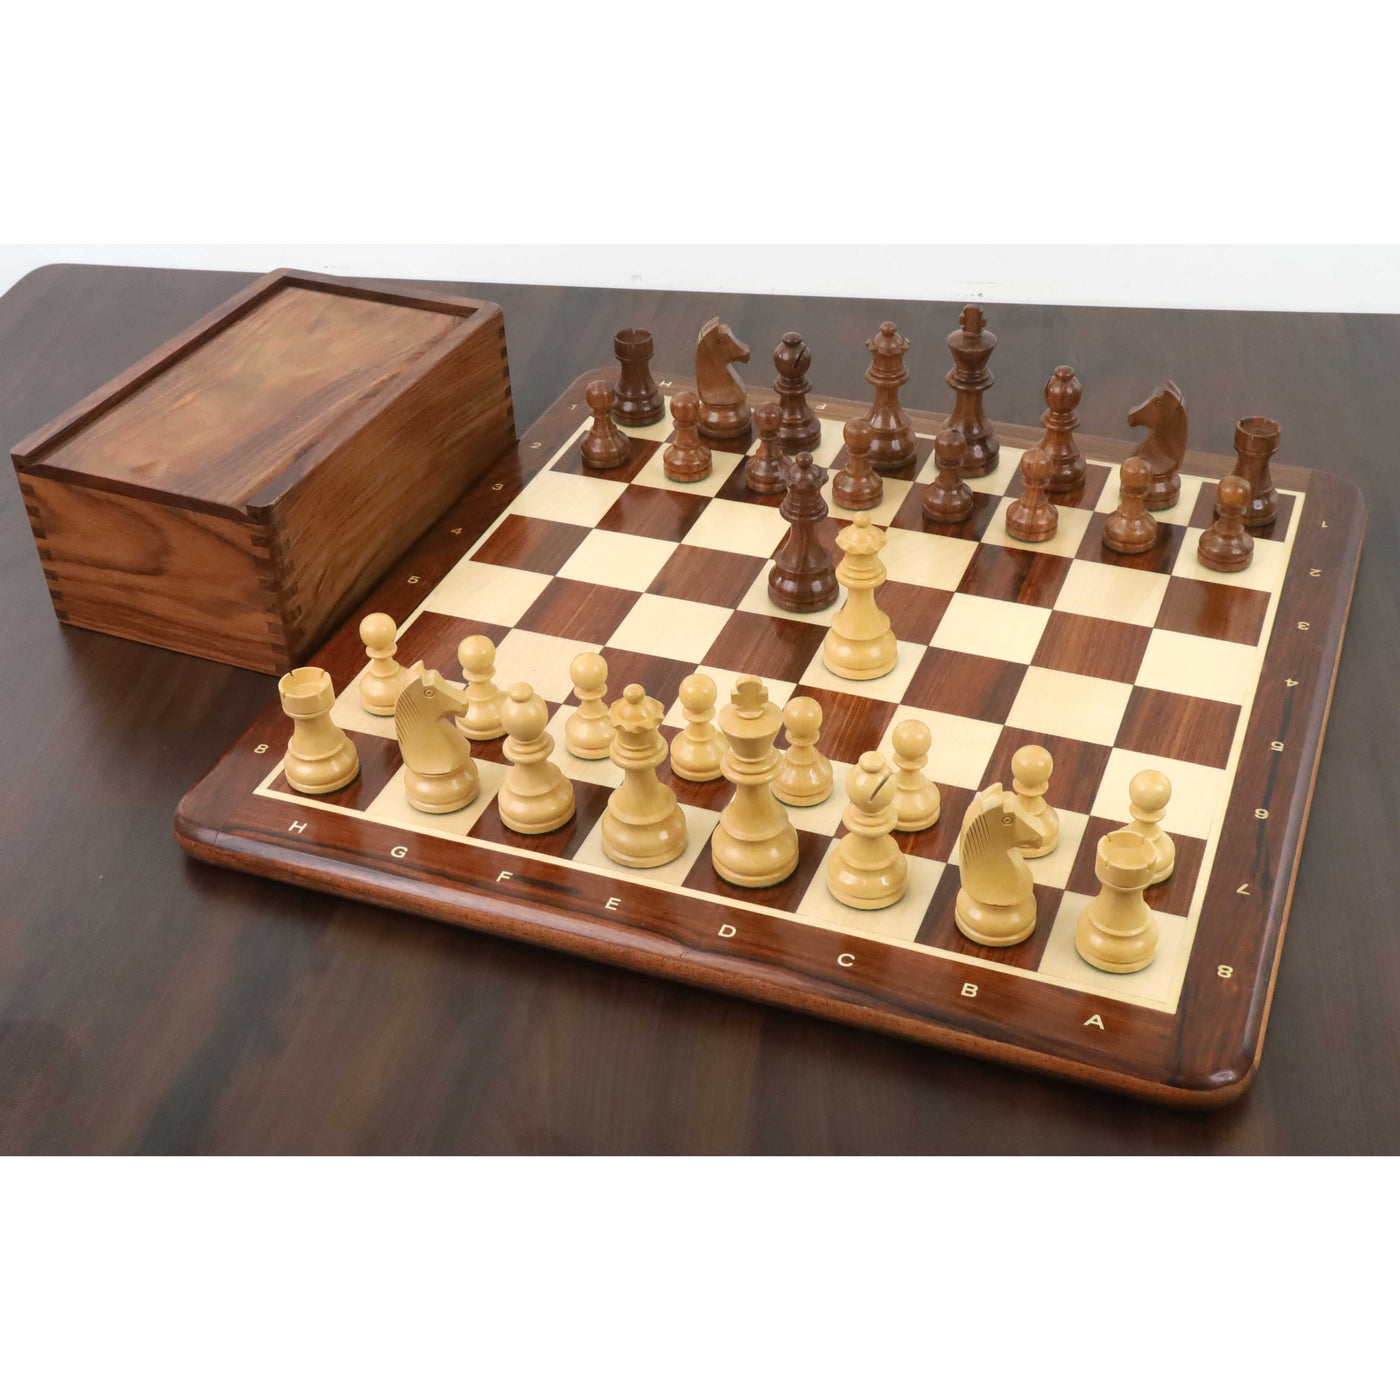 3.9" Championship Chess Set Combo - Pieces in Golden Rosewood with Board and Box